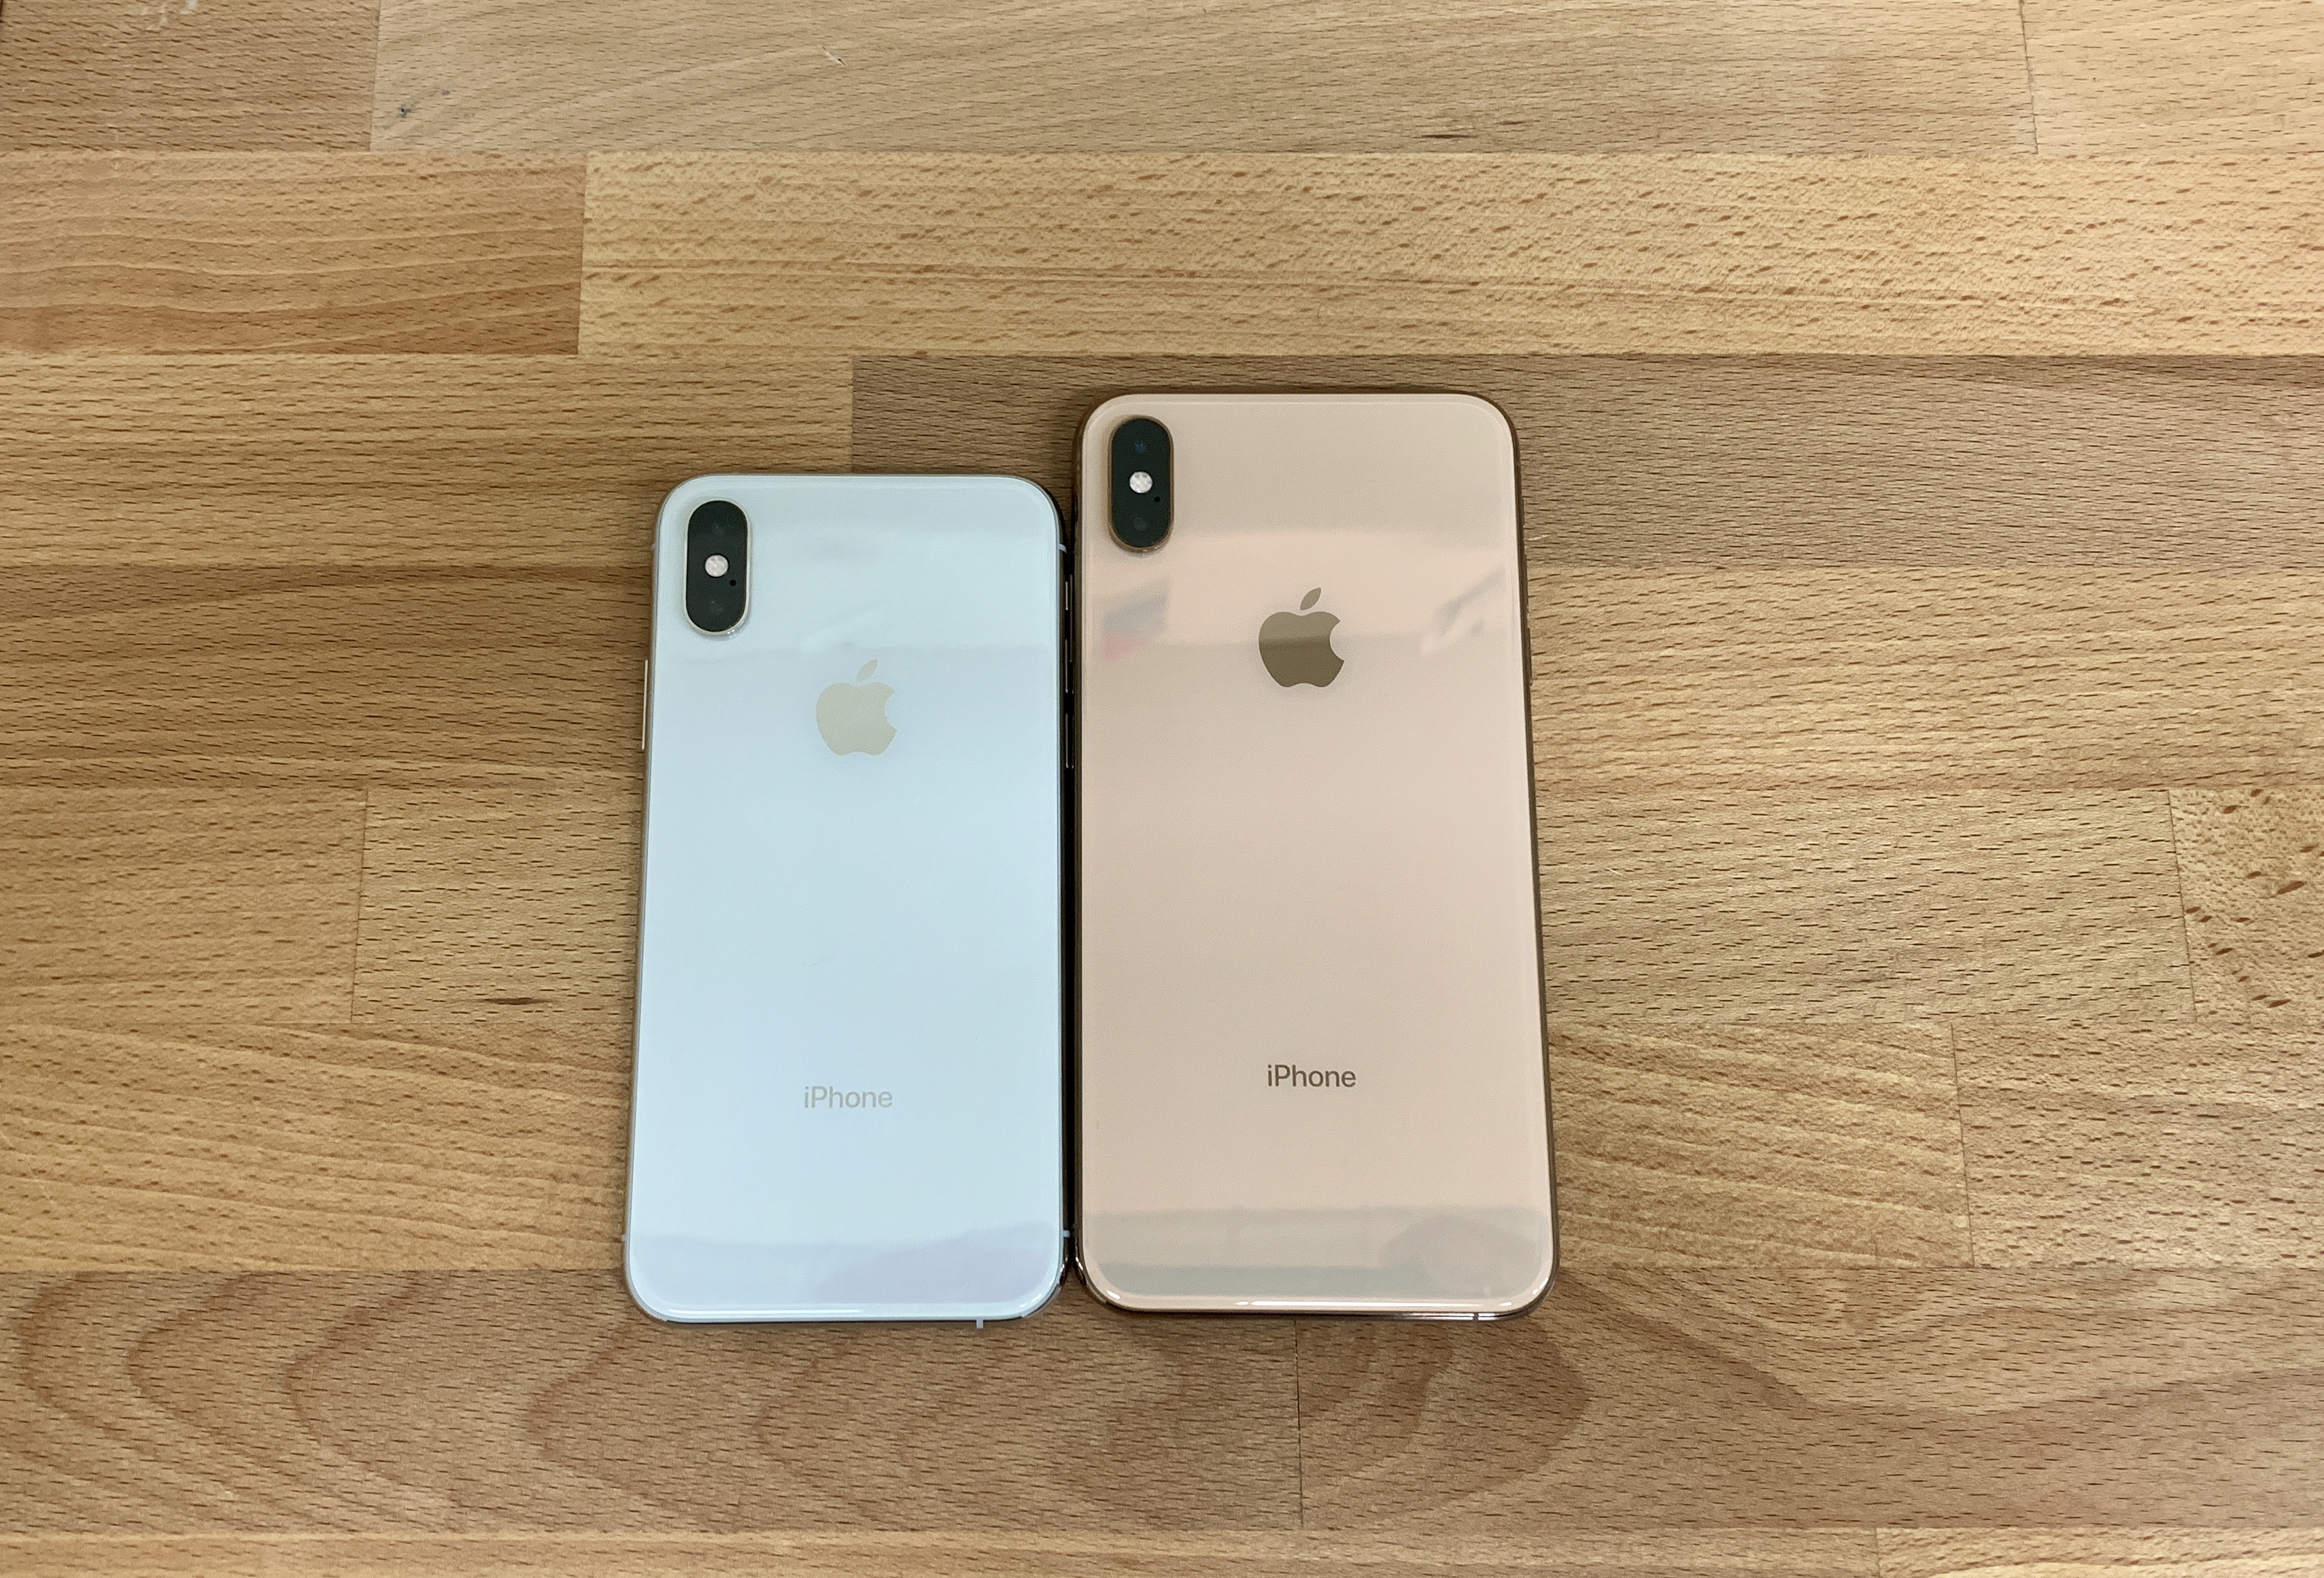 iPhone XS review: Everything Apple has to offer, but in a smaller package